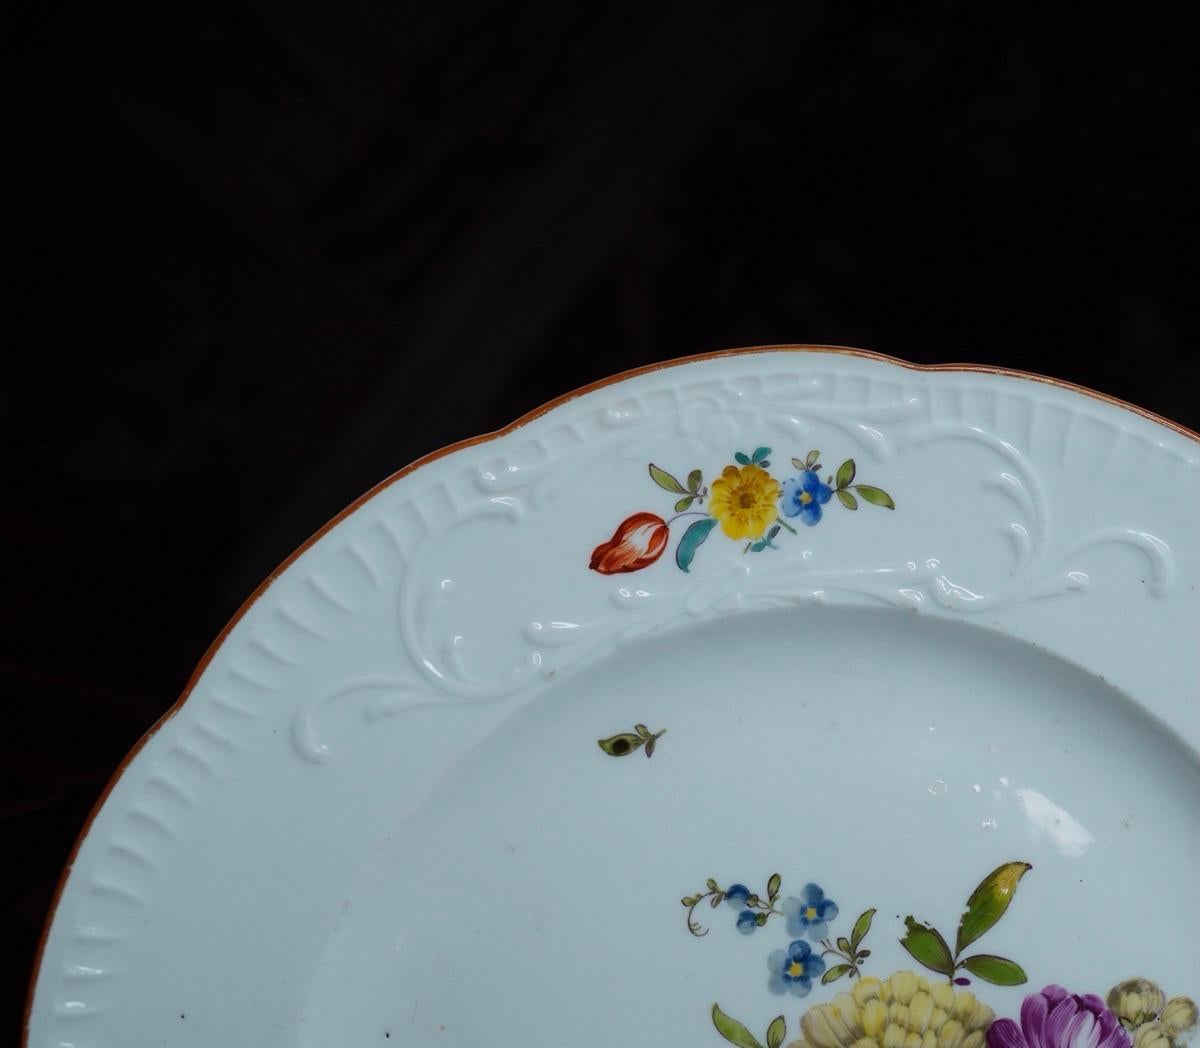 Meissen dinner plate of 'New Spanish' with scroll moulded rim, feathering to the edge, brightly painted with flowers within the three reserves, a larger spray to the center, the rim in pale brown.
Crossed swords & '.' mark,
circa 1760.